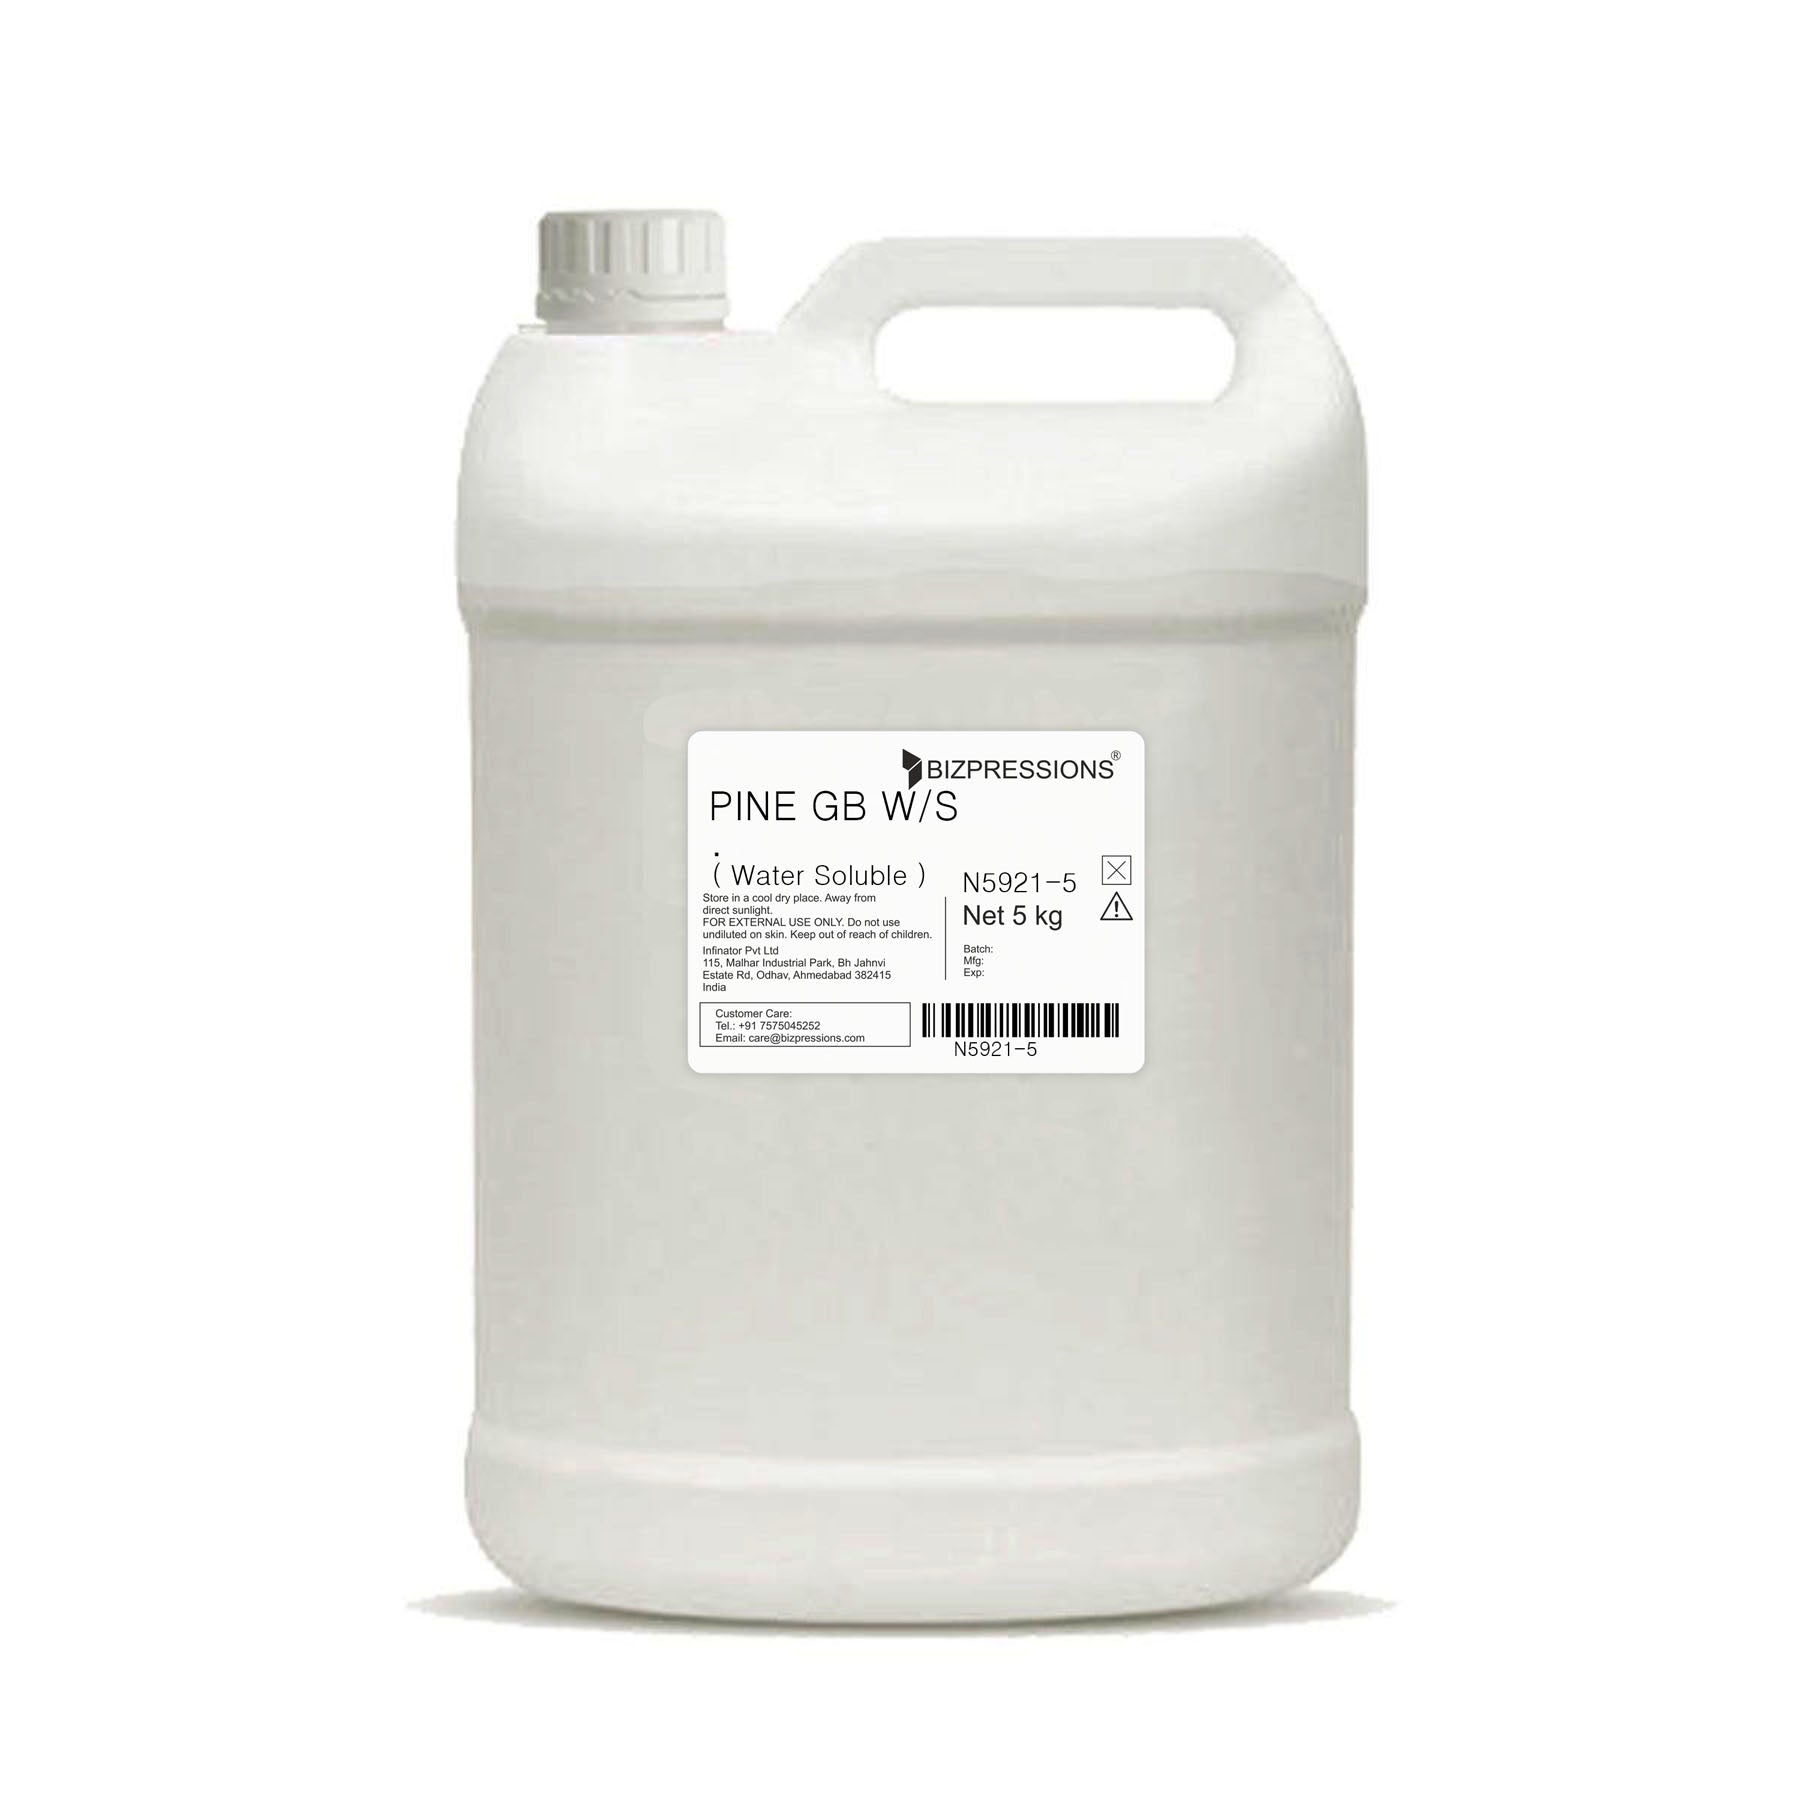 PINE GB W/S - Fragrance ( Water Soluble ) - 5 kg